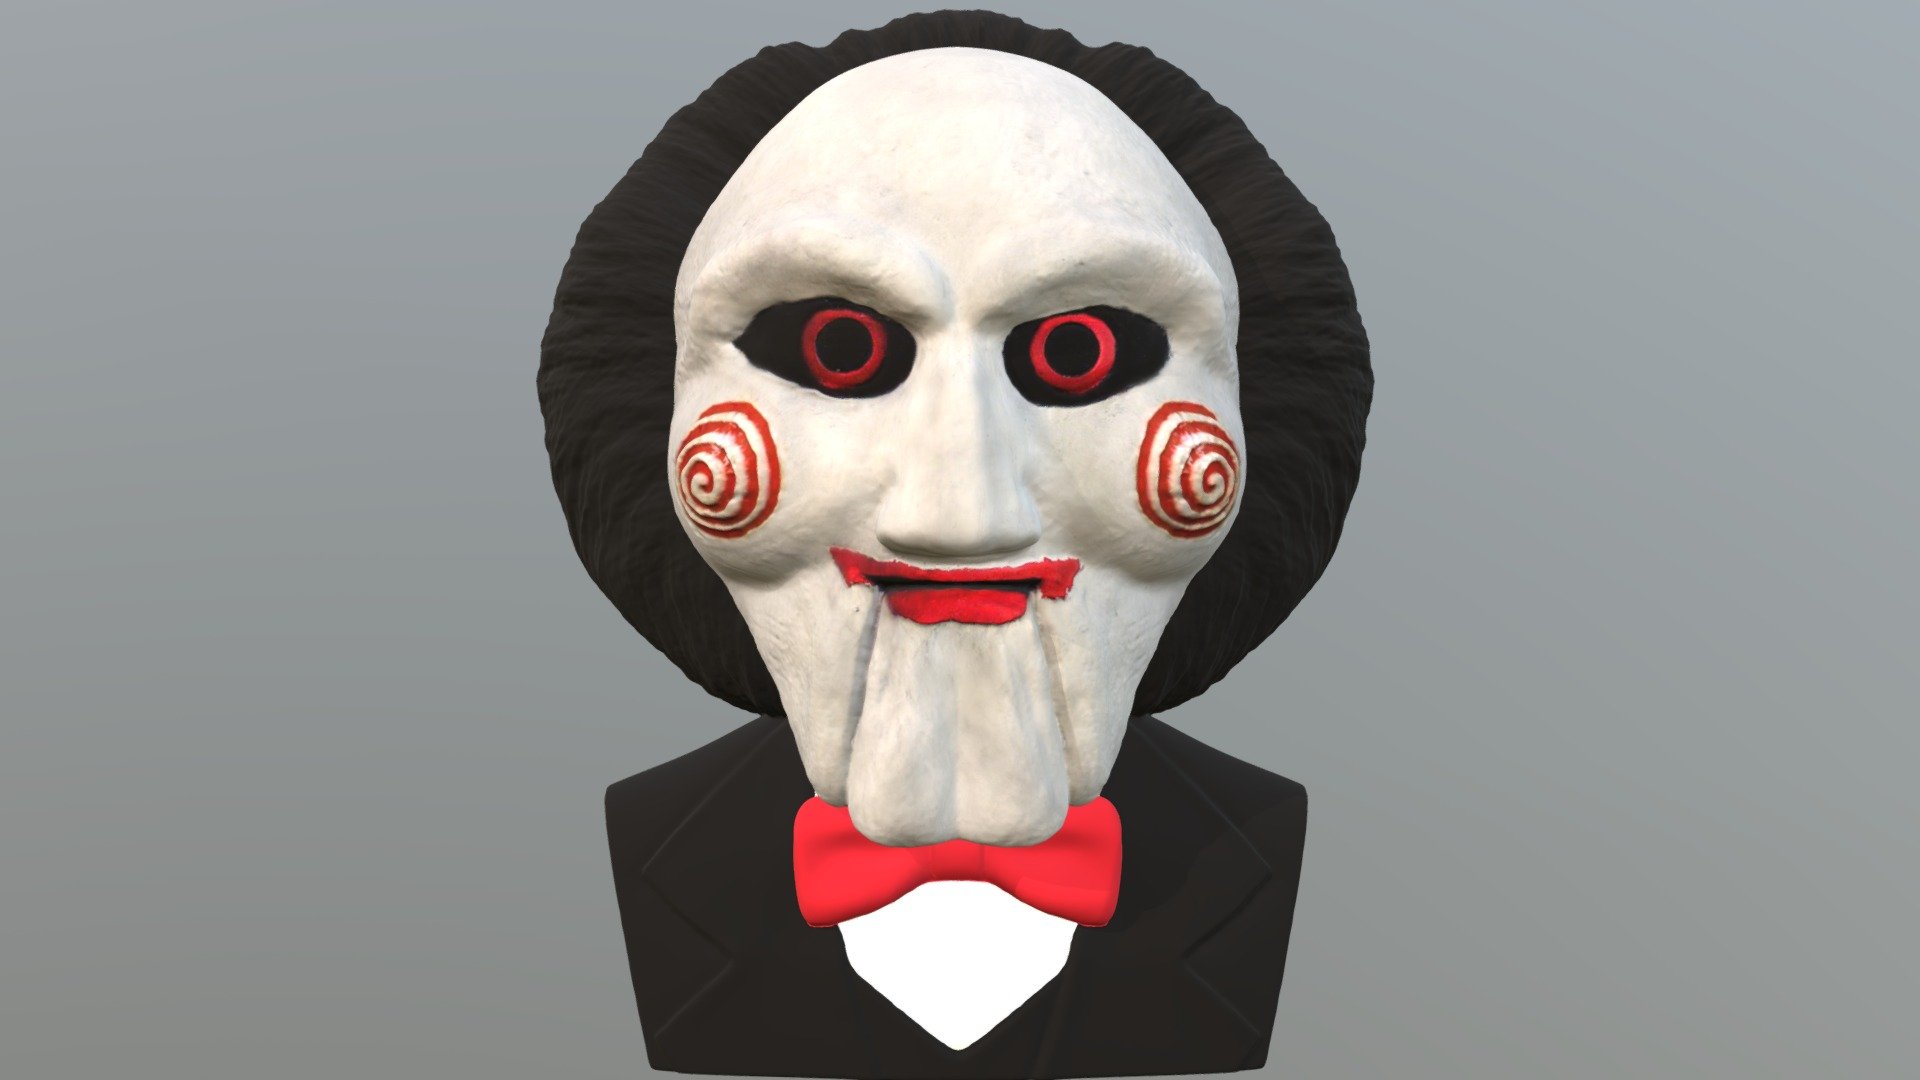 Here is Billy the Puppet from Saw movie bust 3D model ready for full color 3D printing. The model current size is 5 cm height, but you are free to scale it. Zip file contains obj with texture in png. The model was created in ZBrush, Mudbox and Photoshop.

If you have any questions please don’t hesitate to contact me. I will respond you ASAP. I encourage you to check my other celebrity 3D models 3d model